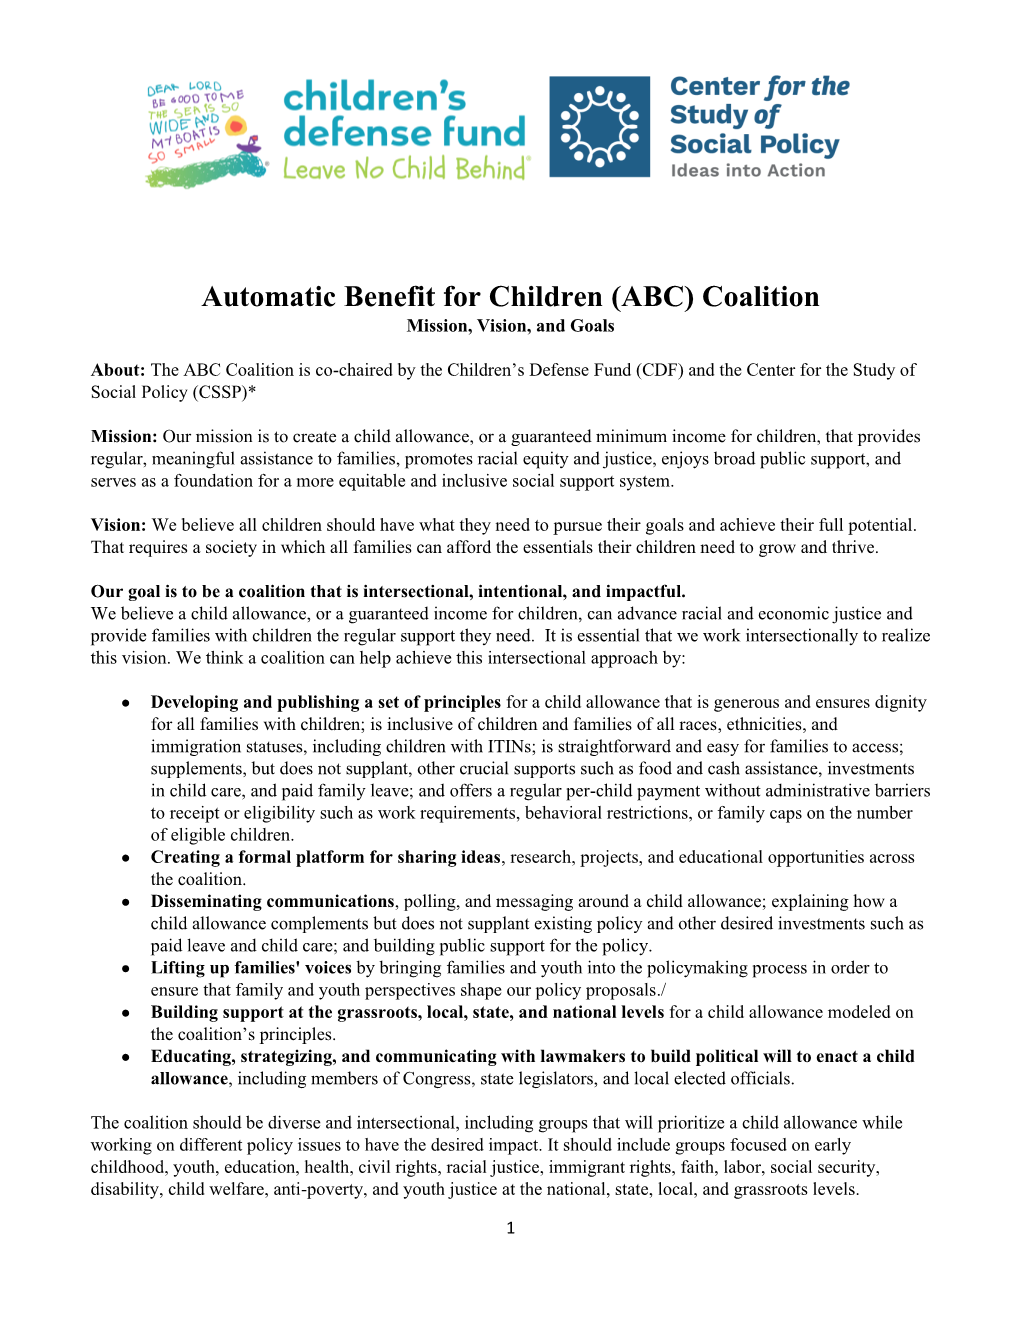 Automatic Benefit for Children (ABC) Coalition Mission, Vision, and Goals